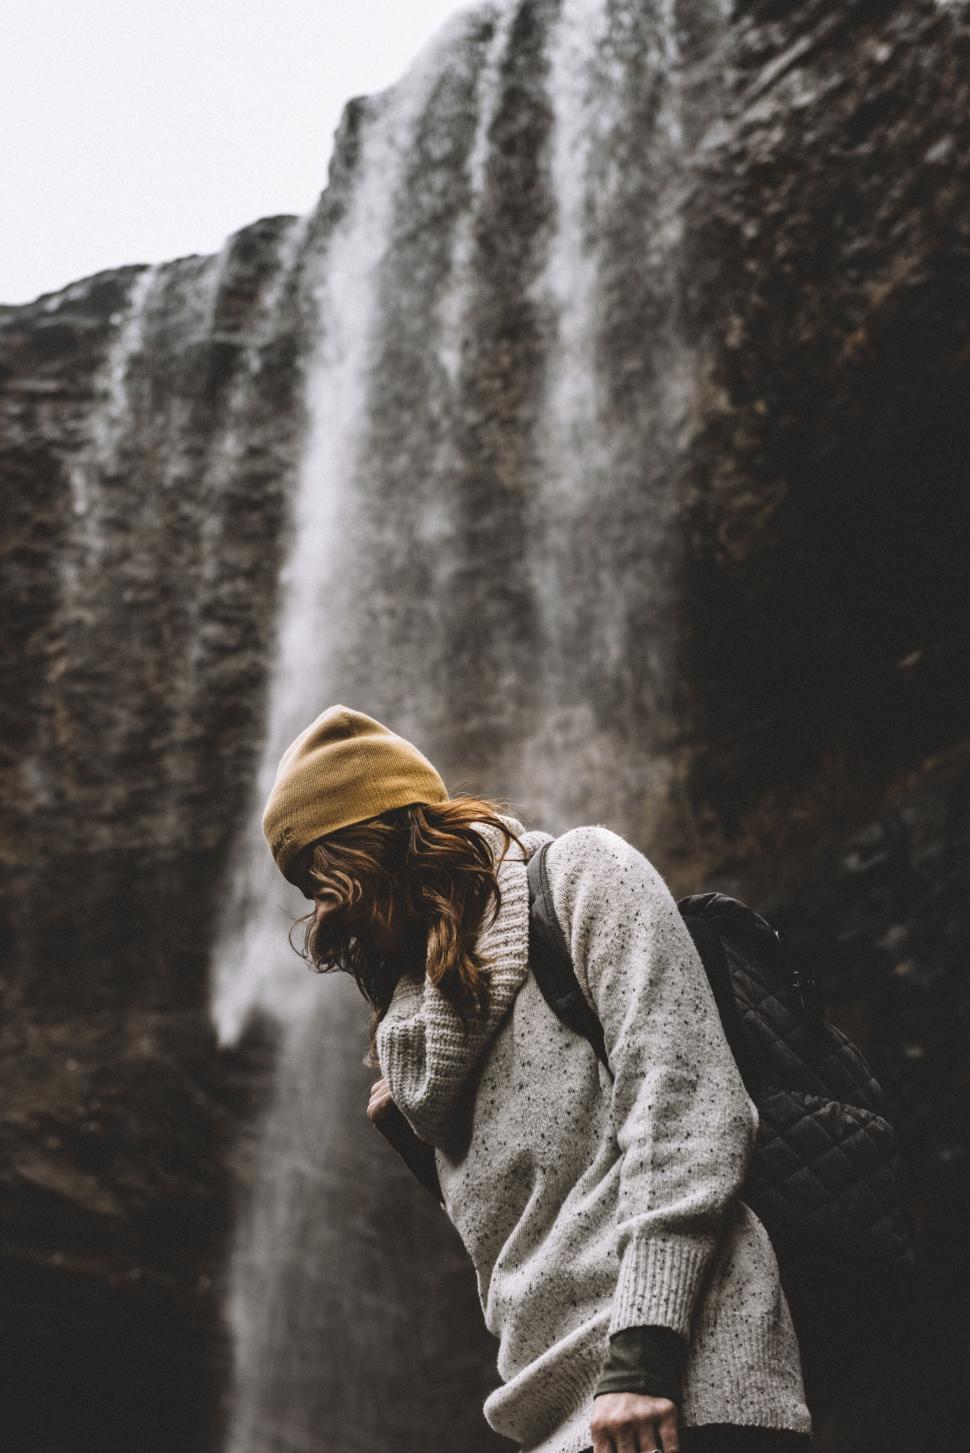 Free Image of Woman in front of waterfall in nature 